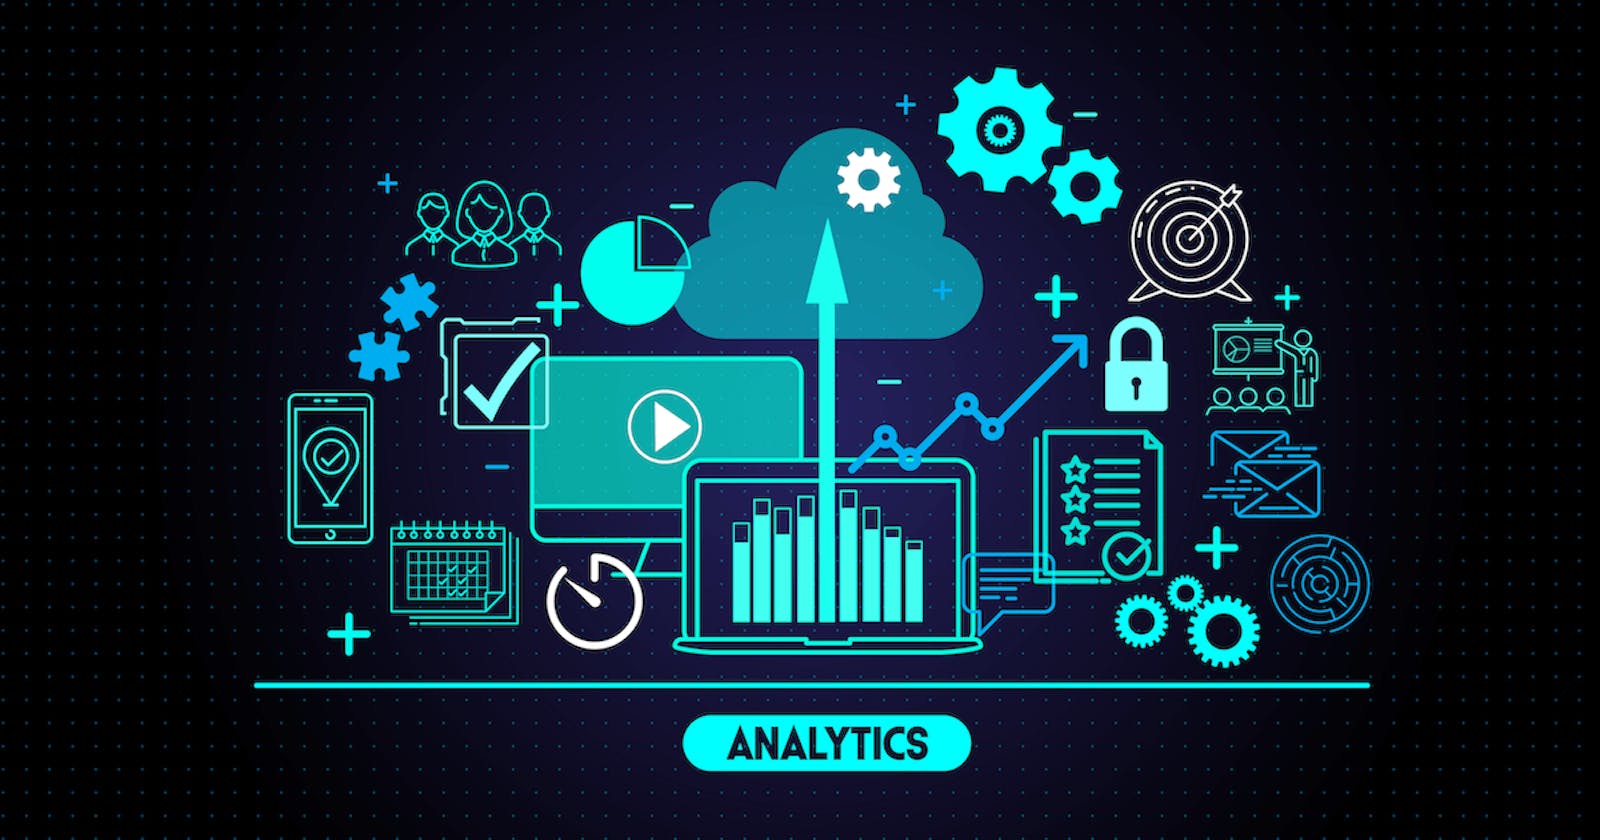 How to Get Started with Data Analytics